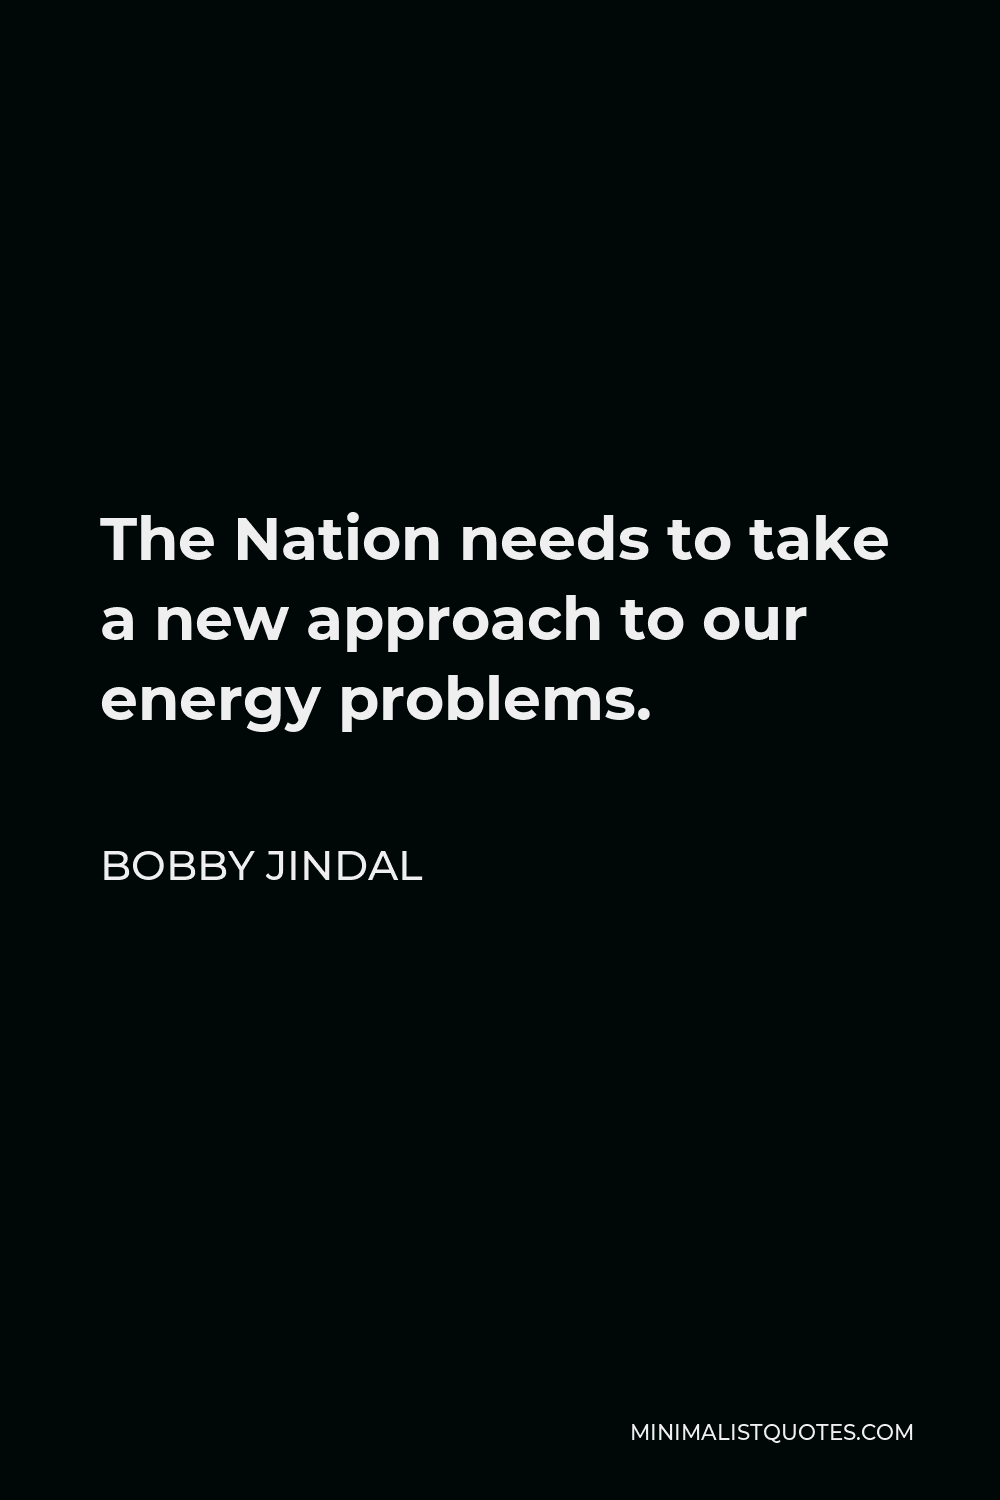 Bobby Jindal Quote - The Nation needs to take a new approach to our energy problems.